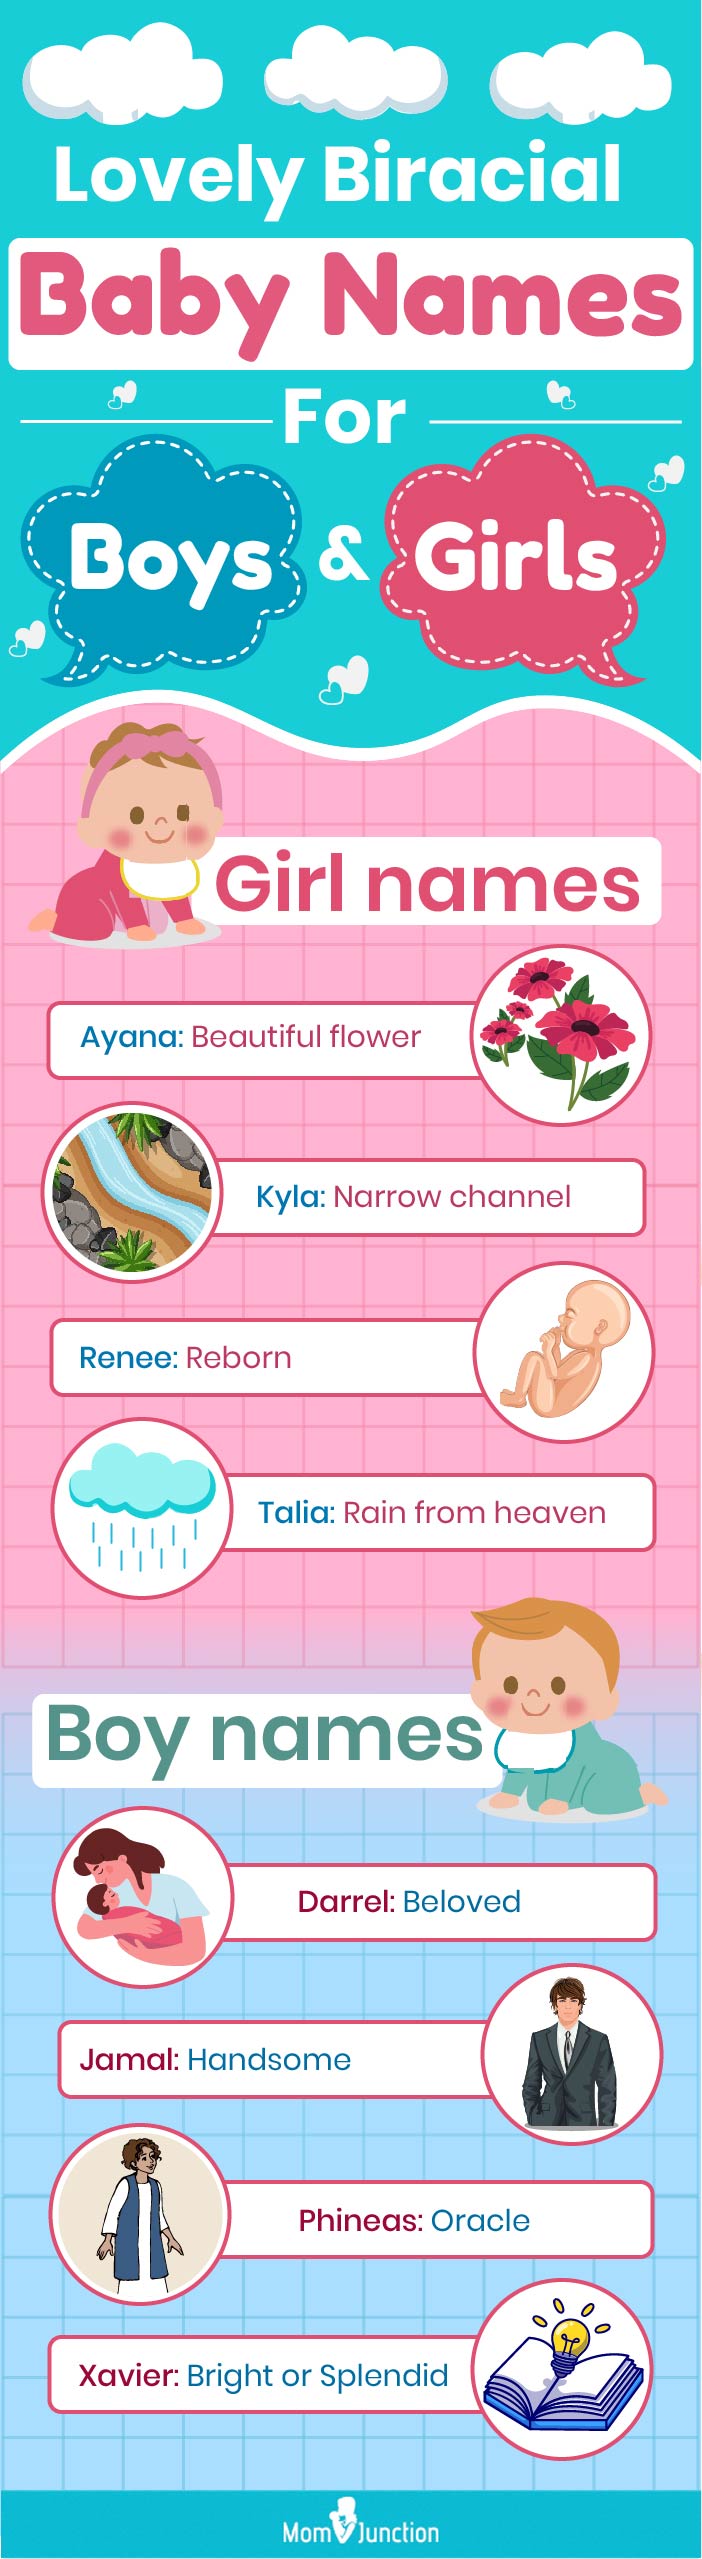 biracial baby names for boys and girls (infographic)